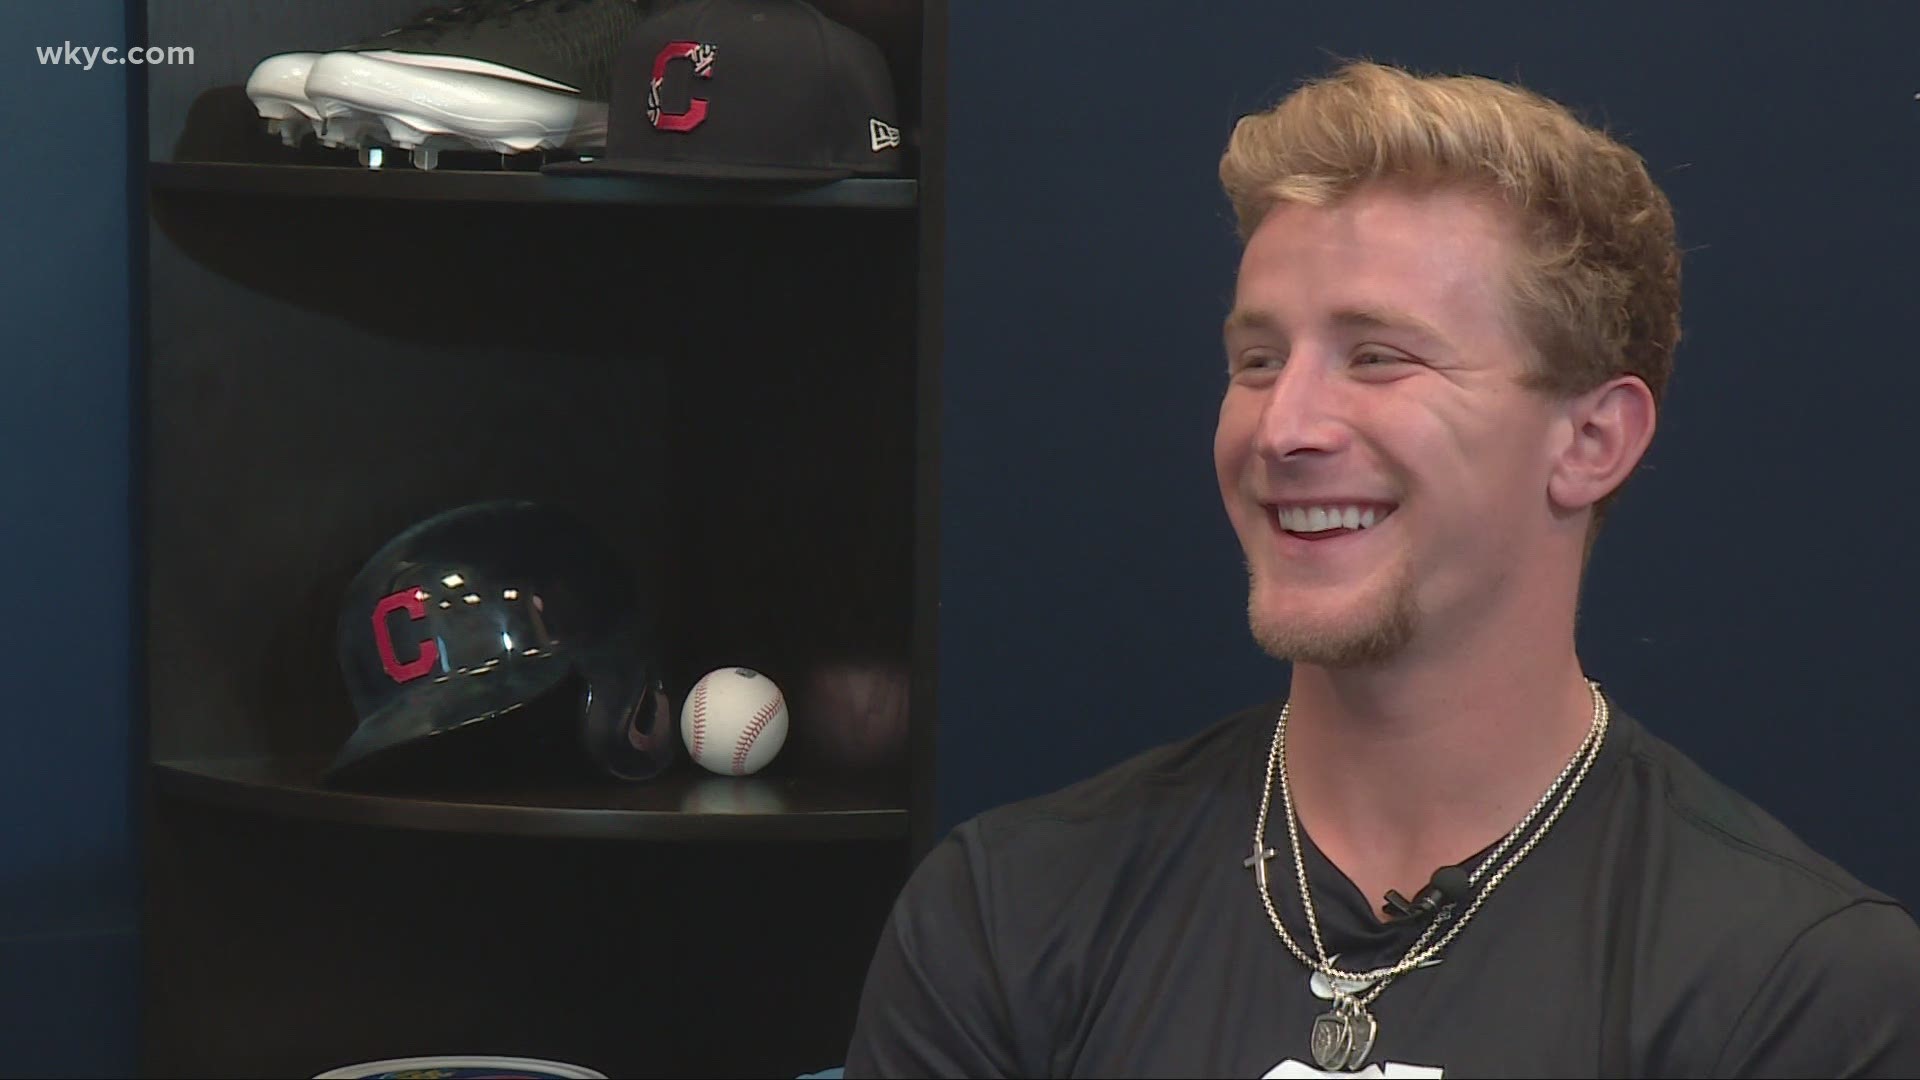 From his favorite music to movies and food, we hit Zach Plesac of the Cleveland Indians with rapid-fire questions. It's our latest edition of 'Beyond the Dugout.'